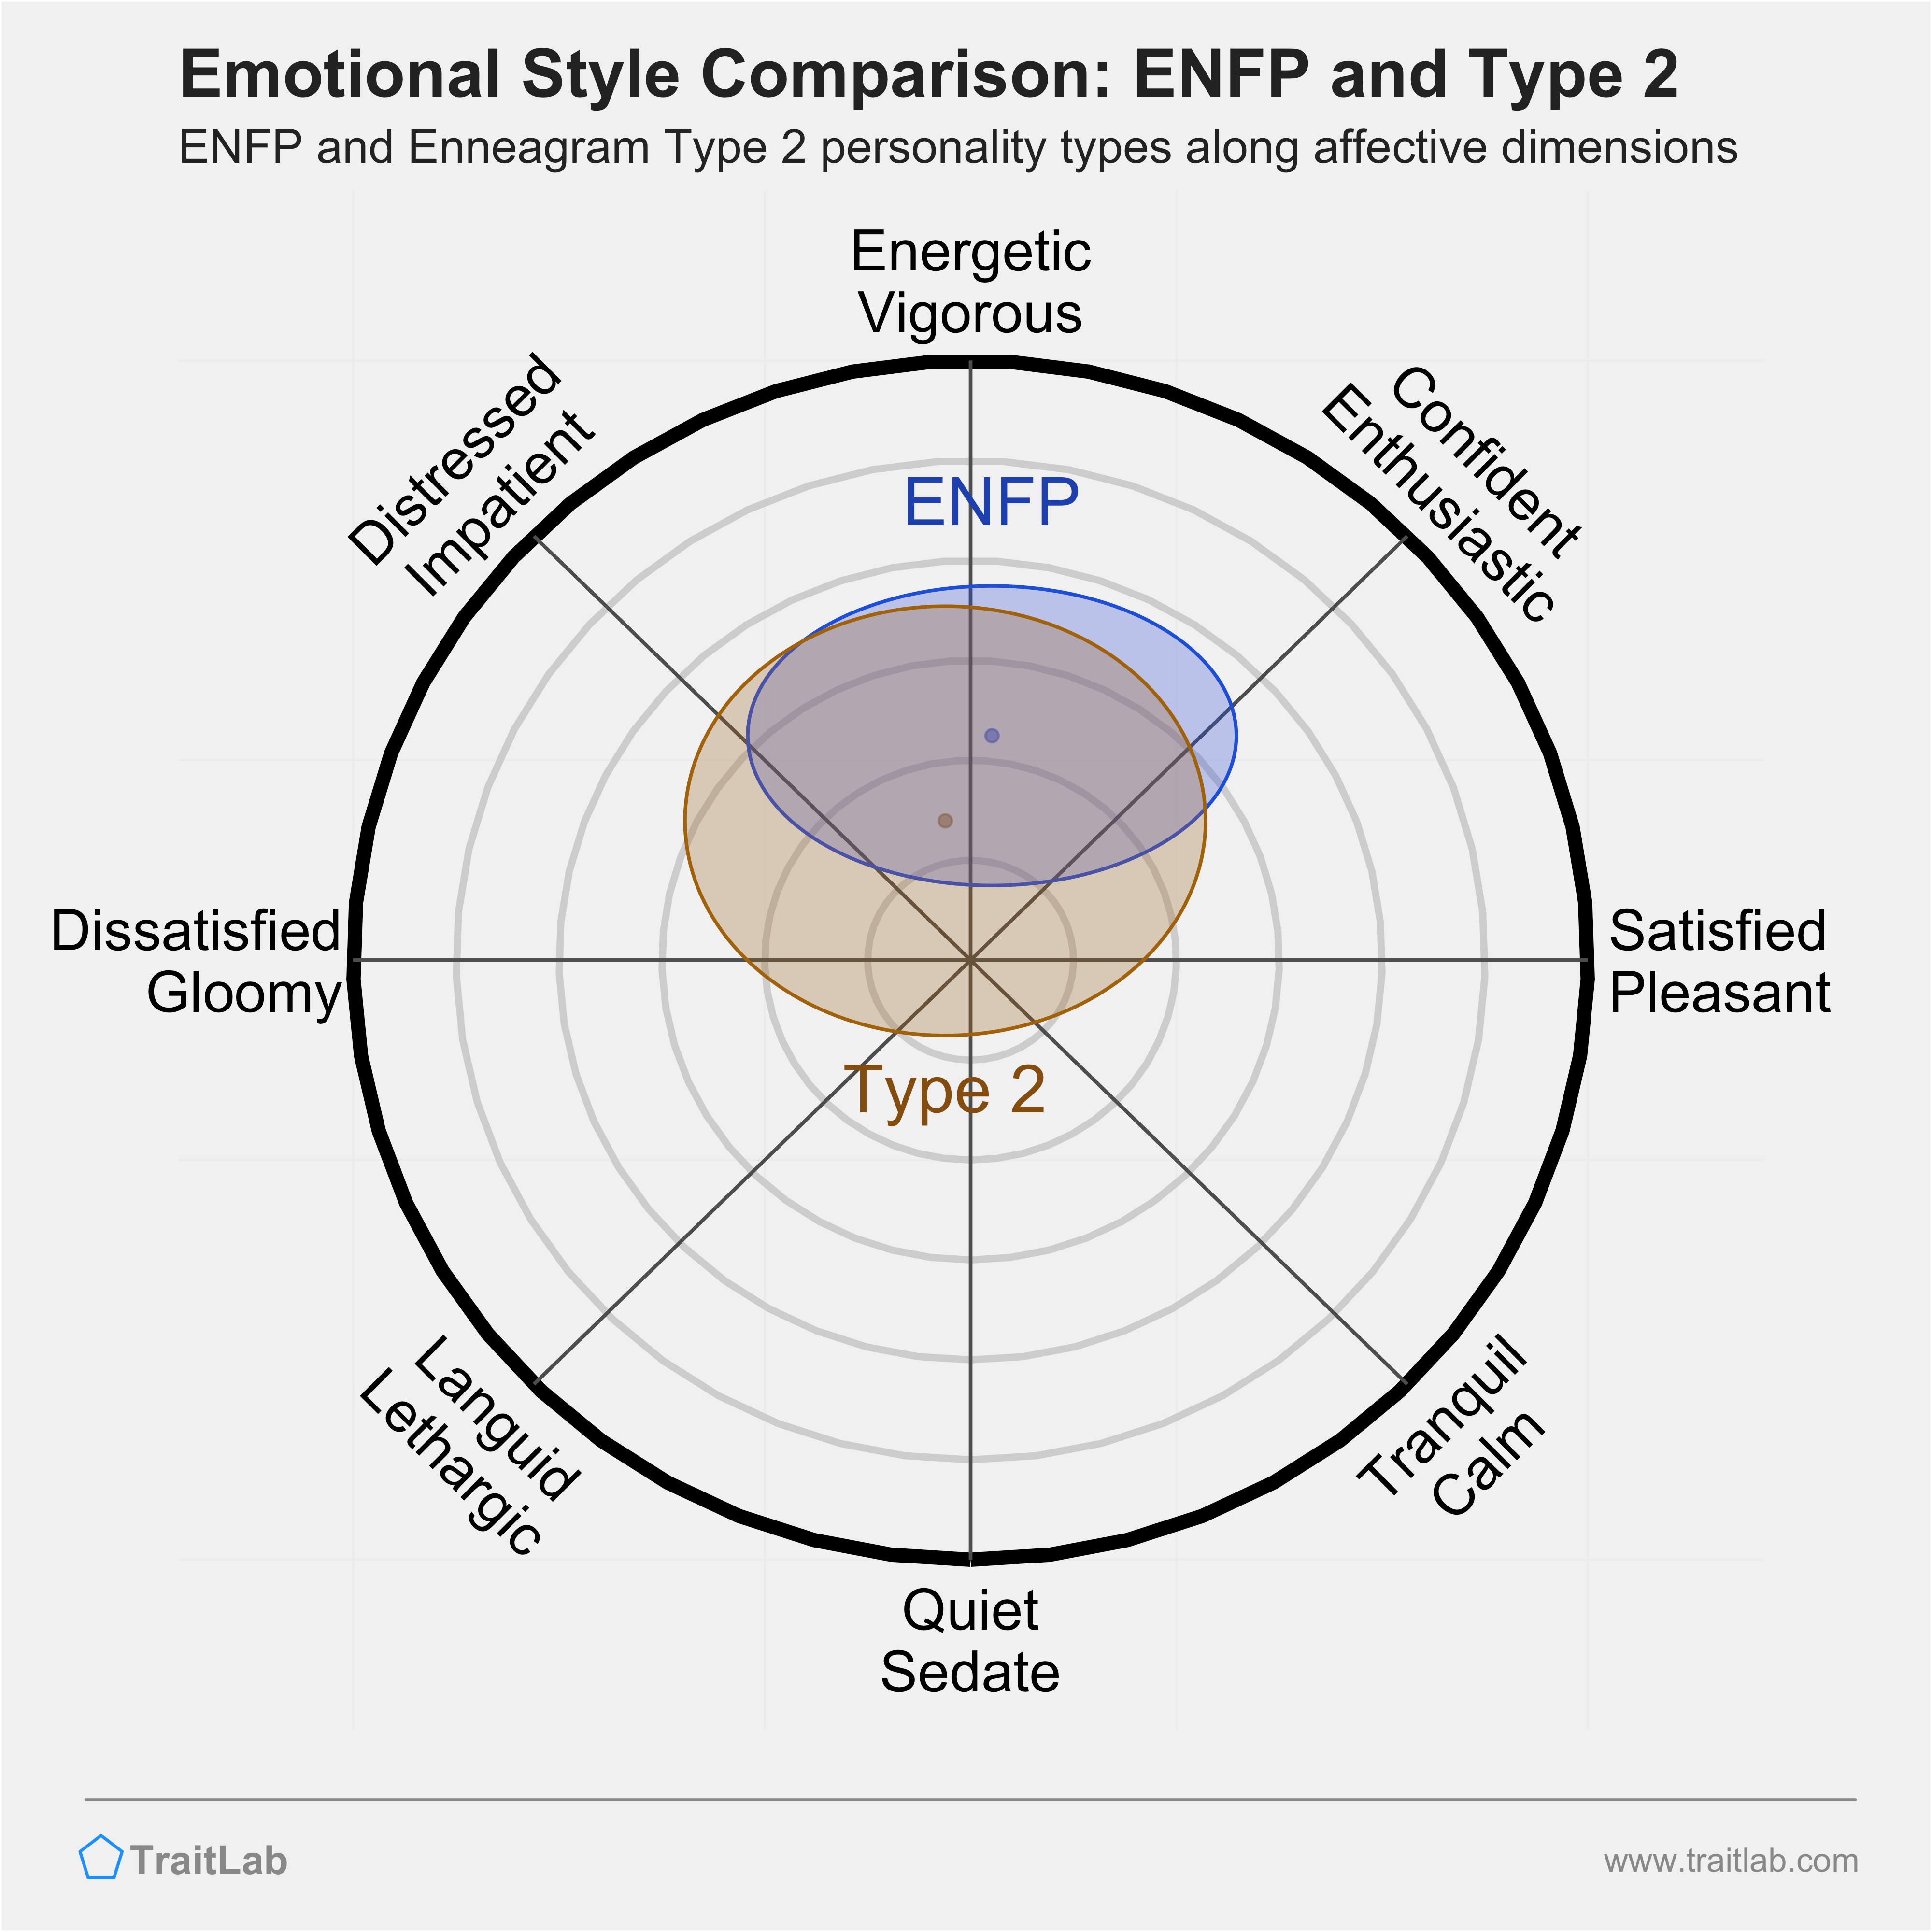 ENFP and Type 2 comparison across emotional (affective) dimensions